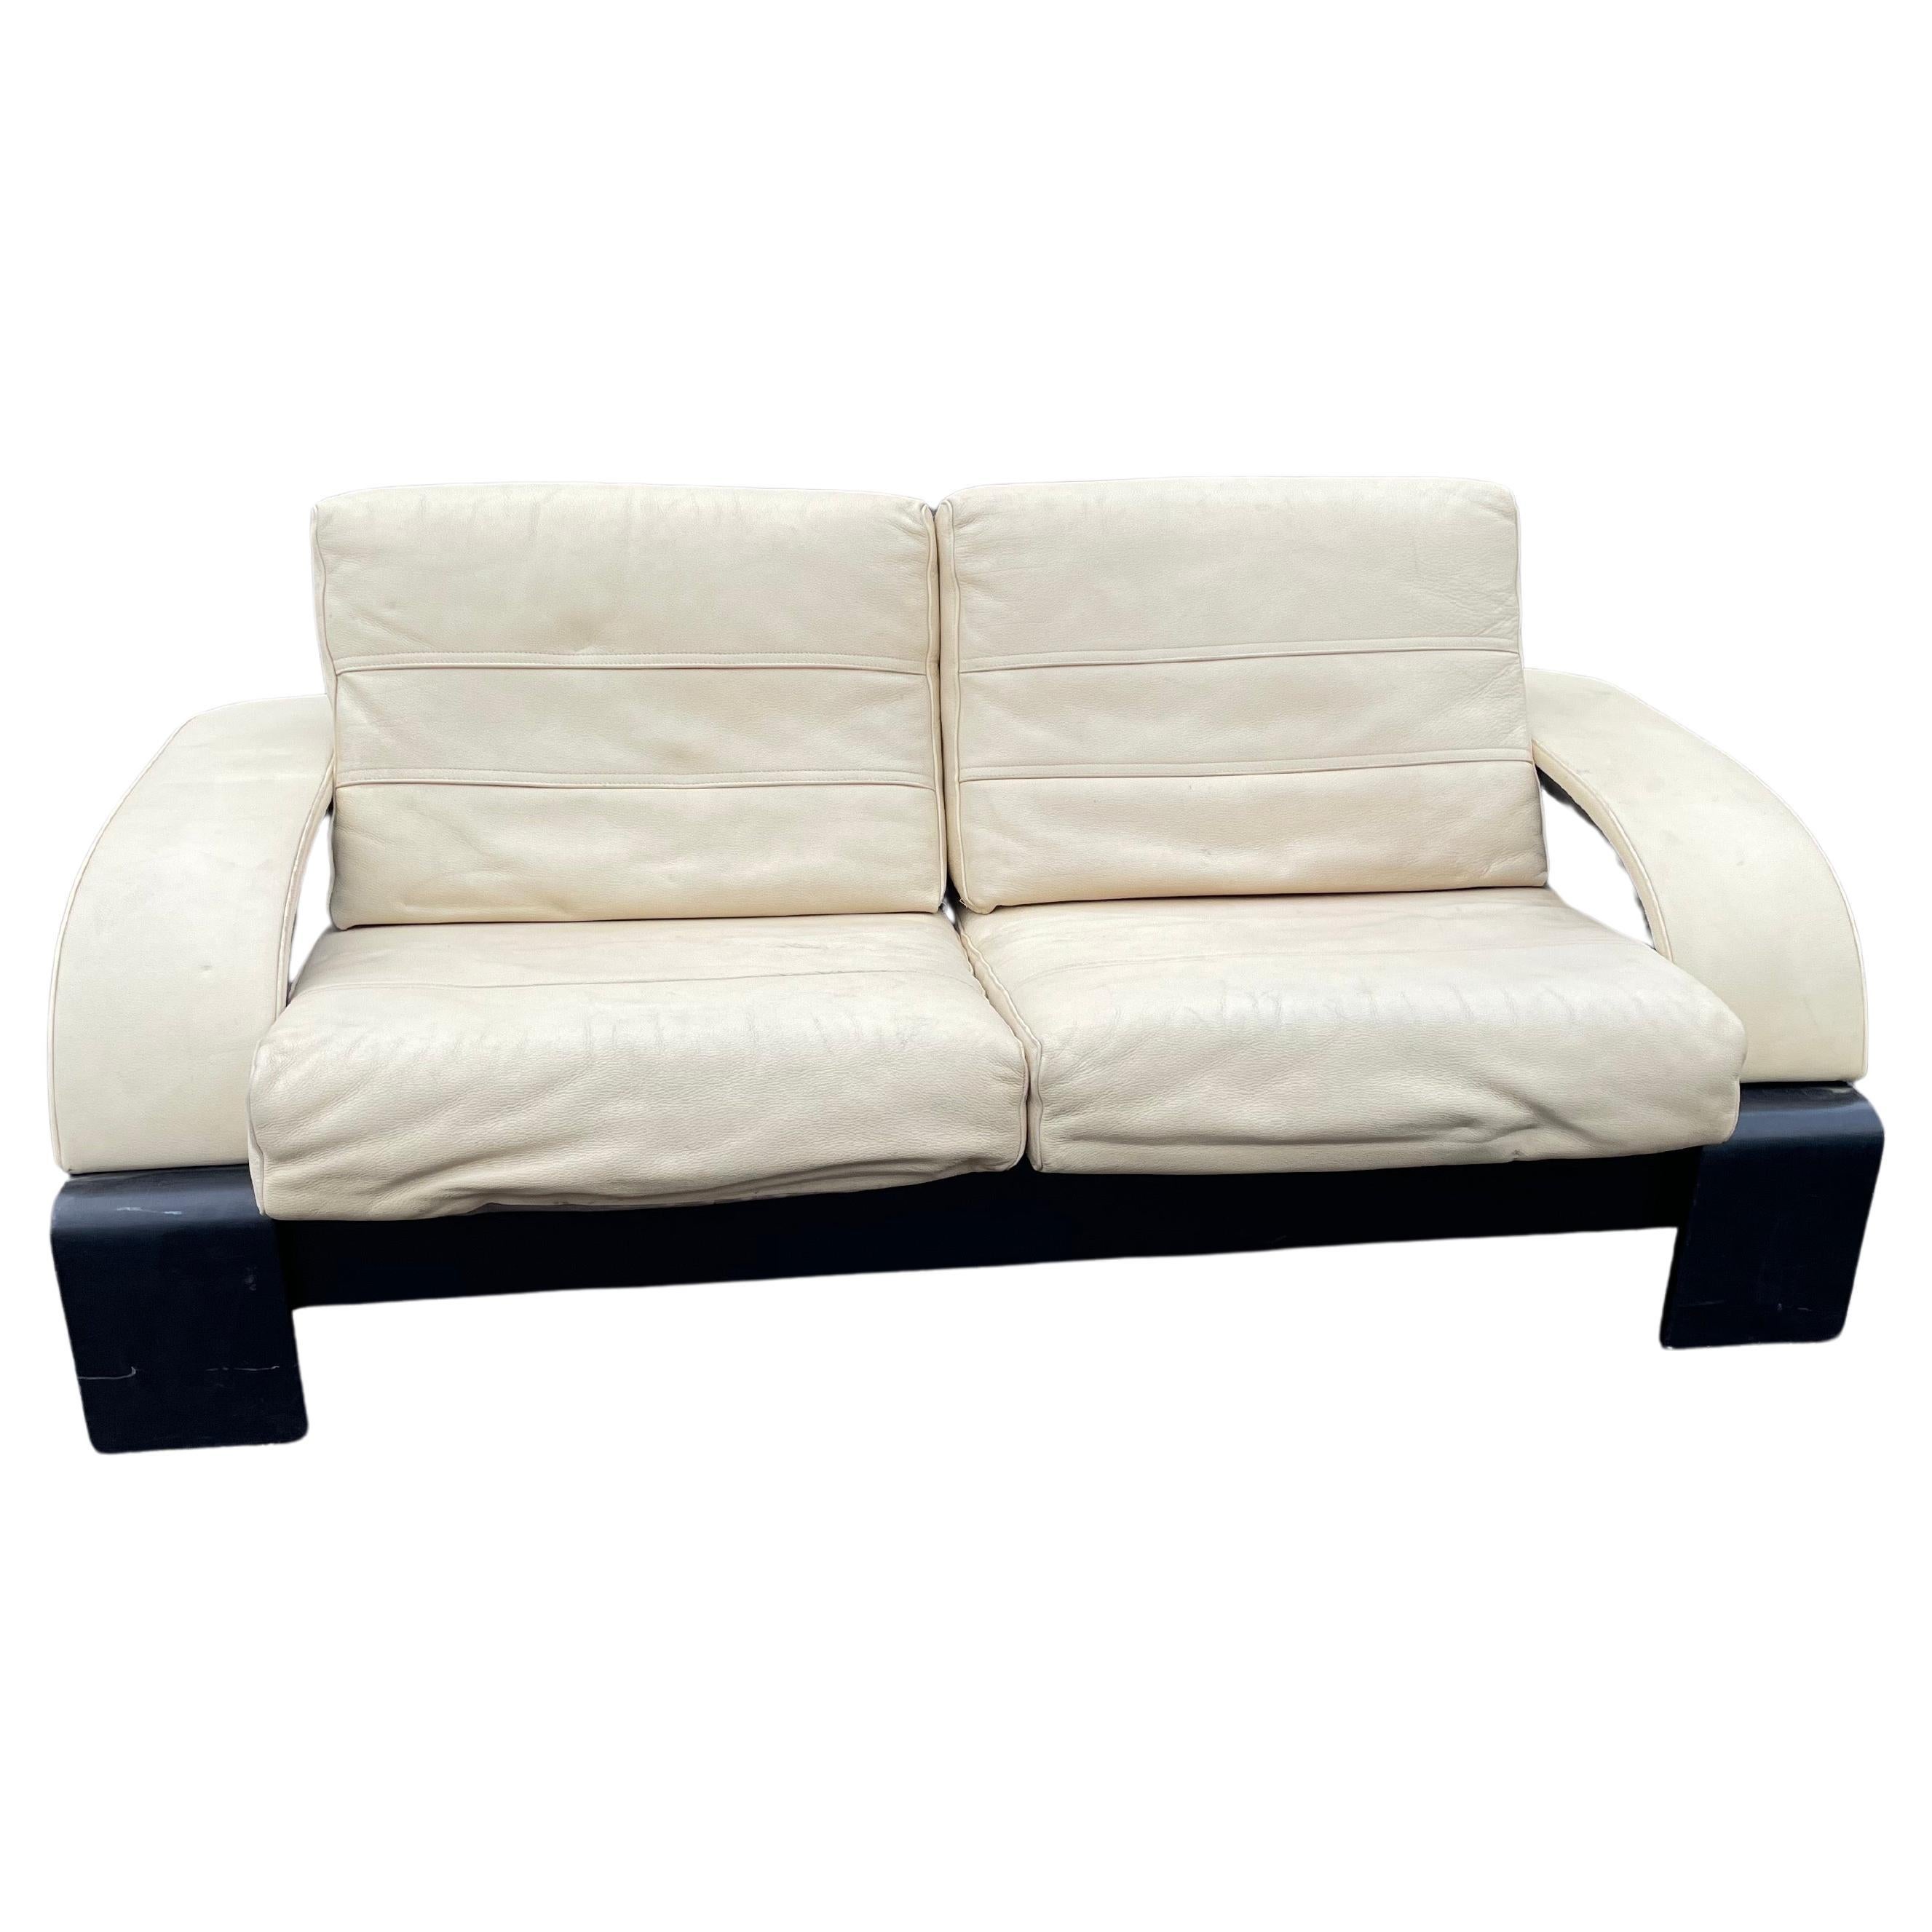 Kroken Sofa, Roche Bobois Edition, by Ake Fribytter, 1980s For Sale